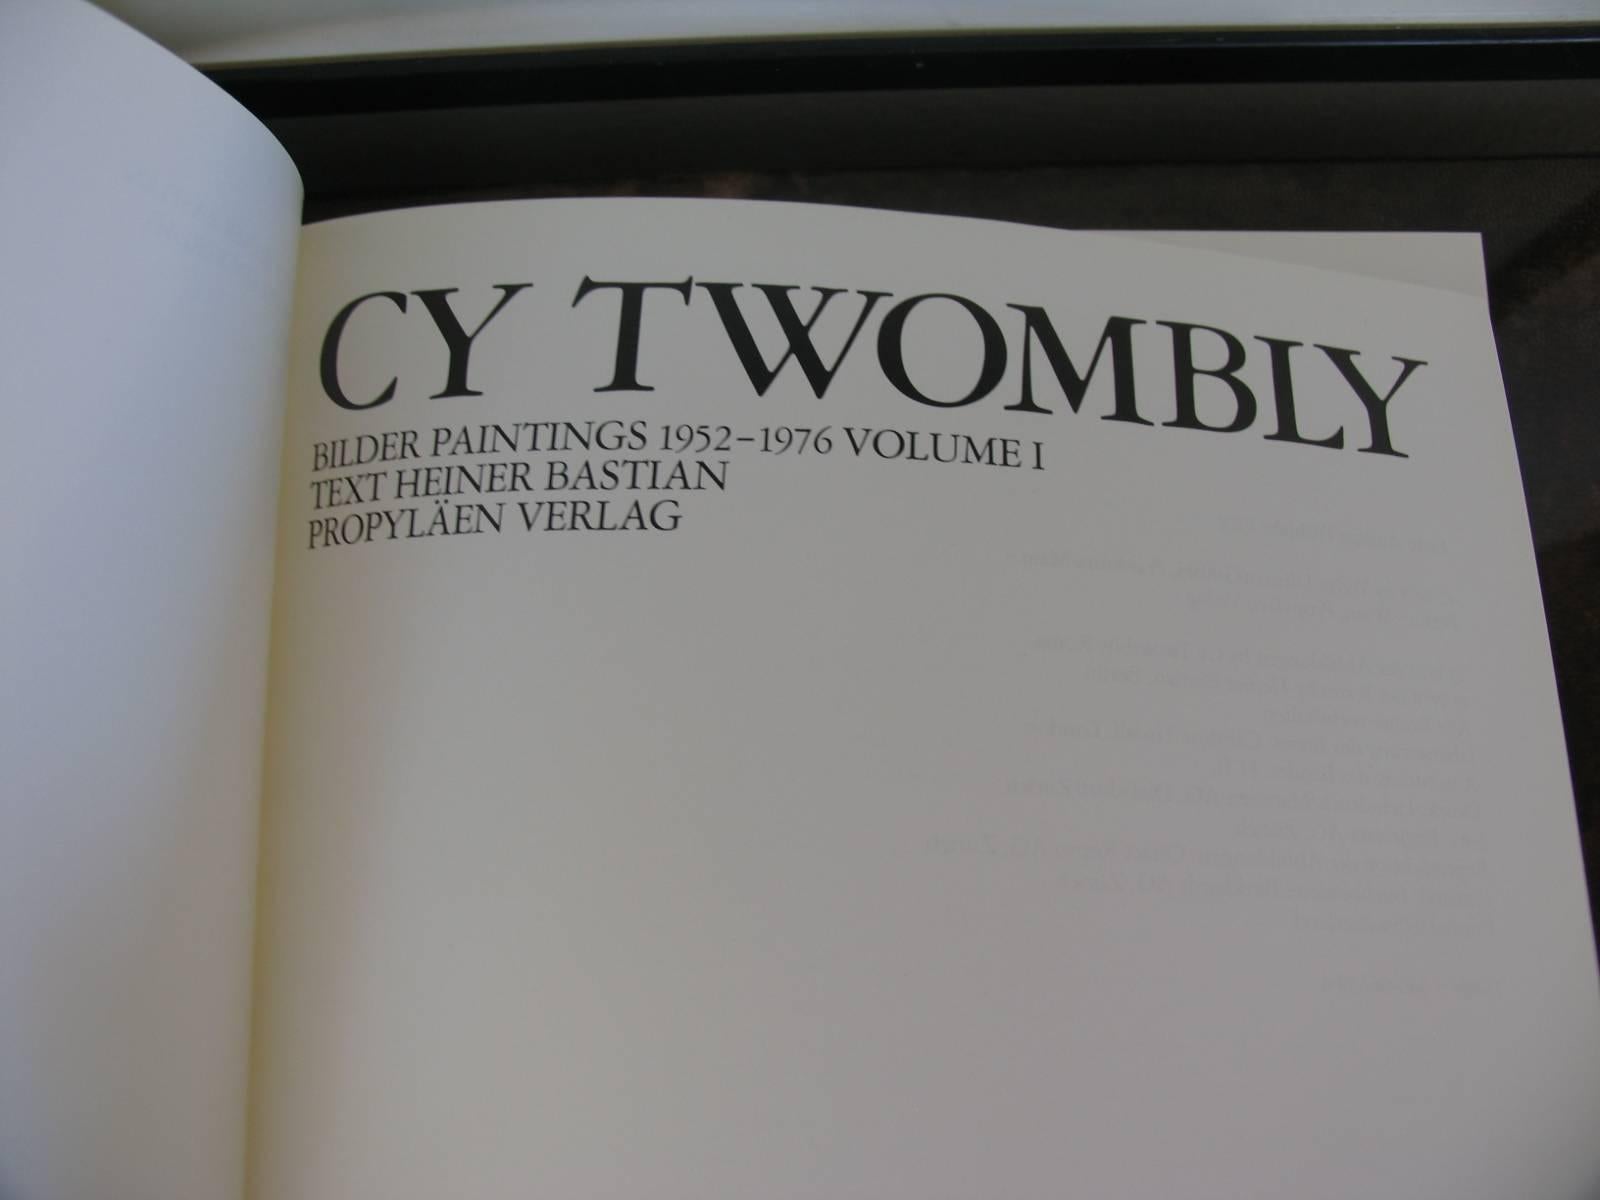 Cy Twombly, Bilder Paintings 1952-1976, Volume 1, First Edition, 1978
Frankfurt: Propylaen Verlag, 1978. First Edition. Text in German by Heiner Bastian translated to English. Illustrated with 98 color plates, each thoroughly documented. Exceptional